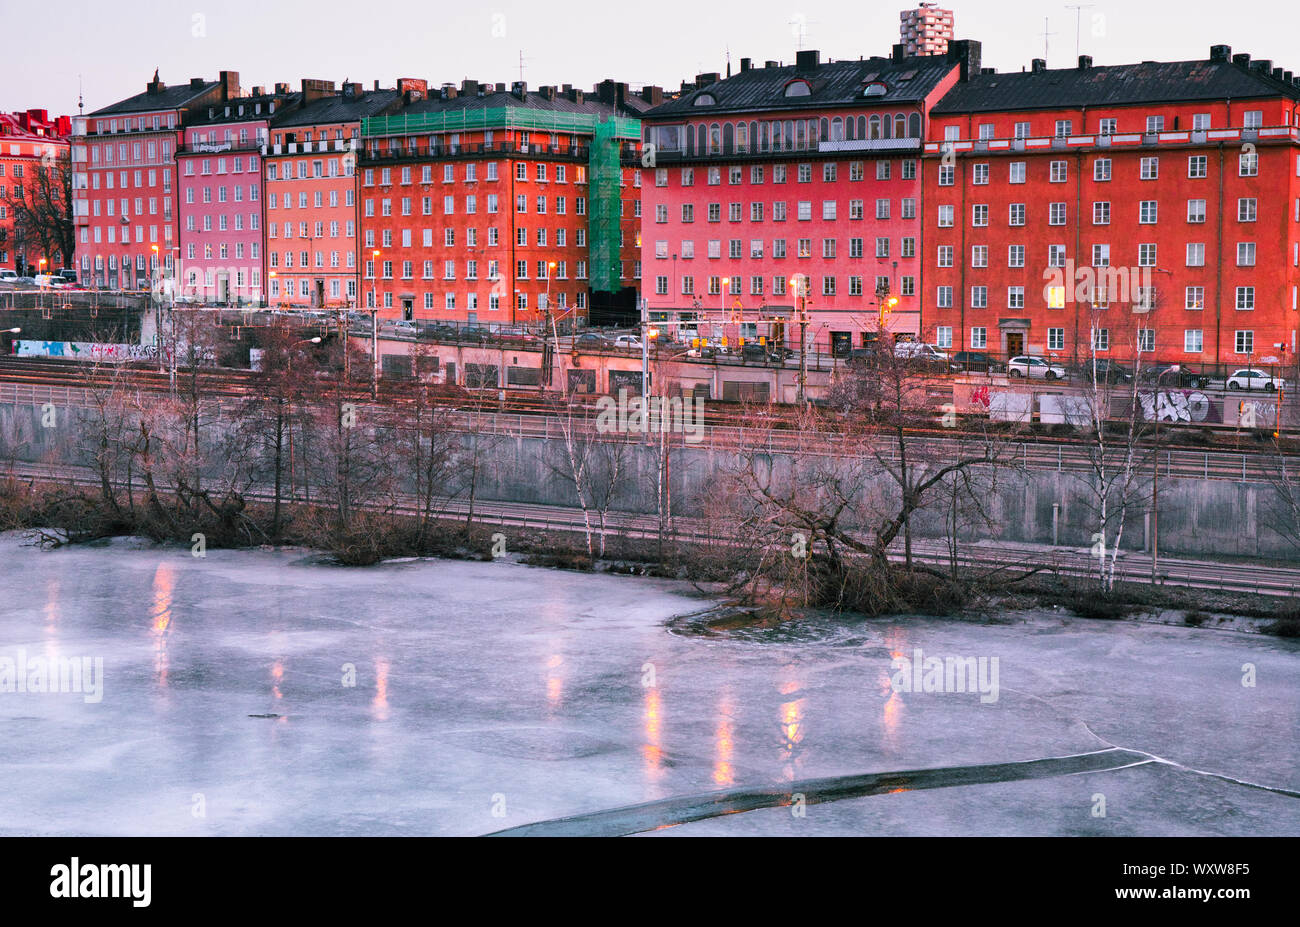 Dawn light on the frozen ice of Karlberg Lake (Karlbergssjon) with colourful facades of the Atlas district houses, Norrmalm, Stockholm, Sweden Stock Photo